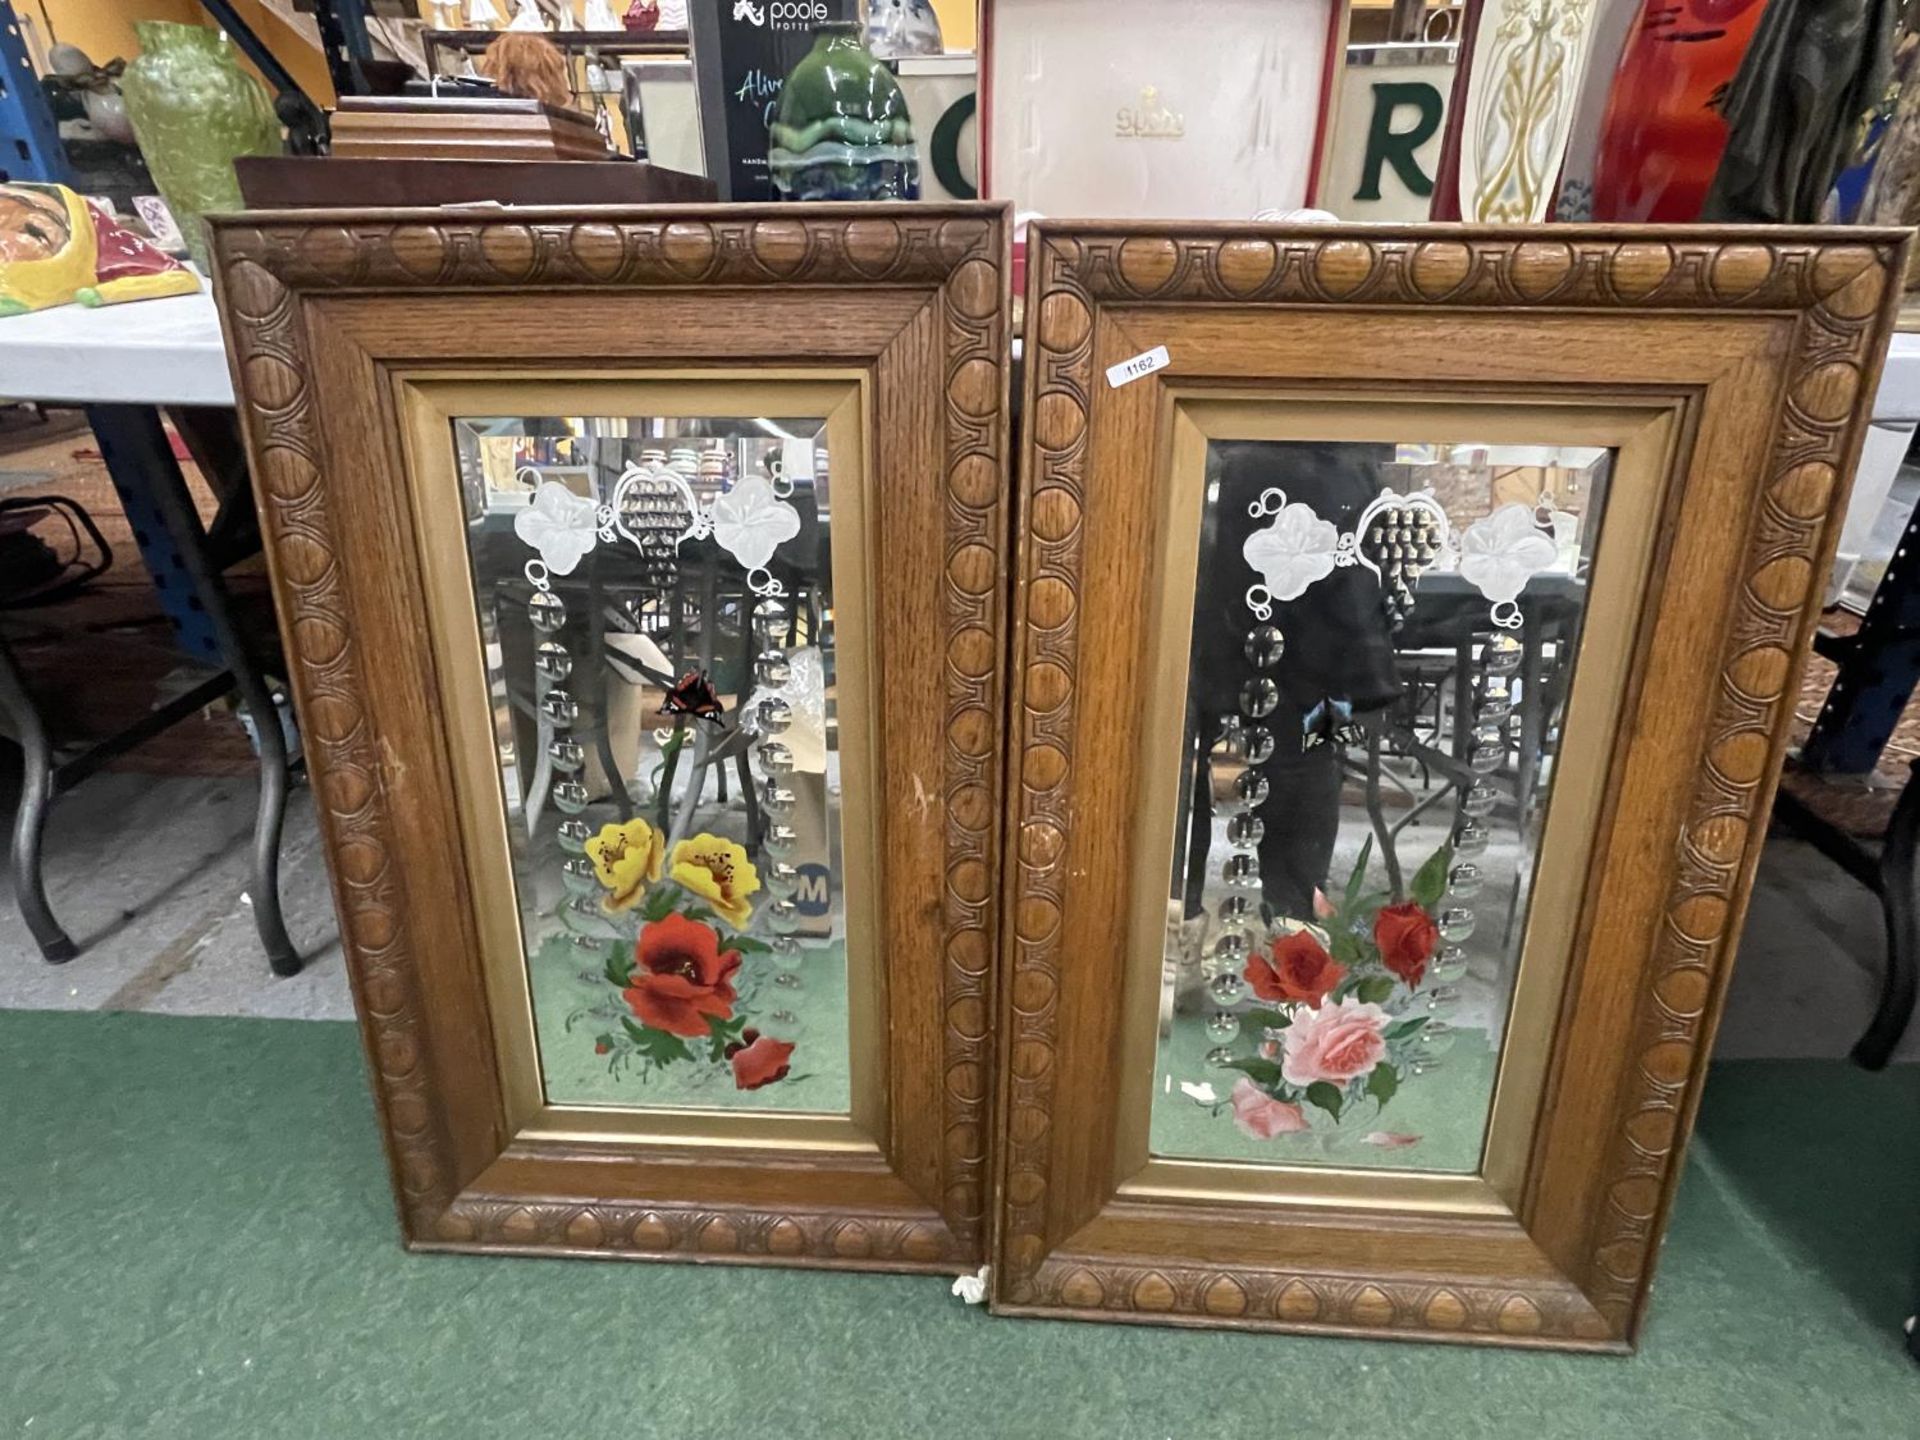 TWO OAK FRAMED DECORATIVE MIRRORS WITH FLOWERS AND BUTTERFLIES 20" X 33" - Image 2 of 6